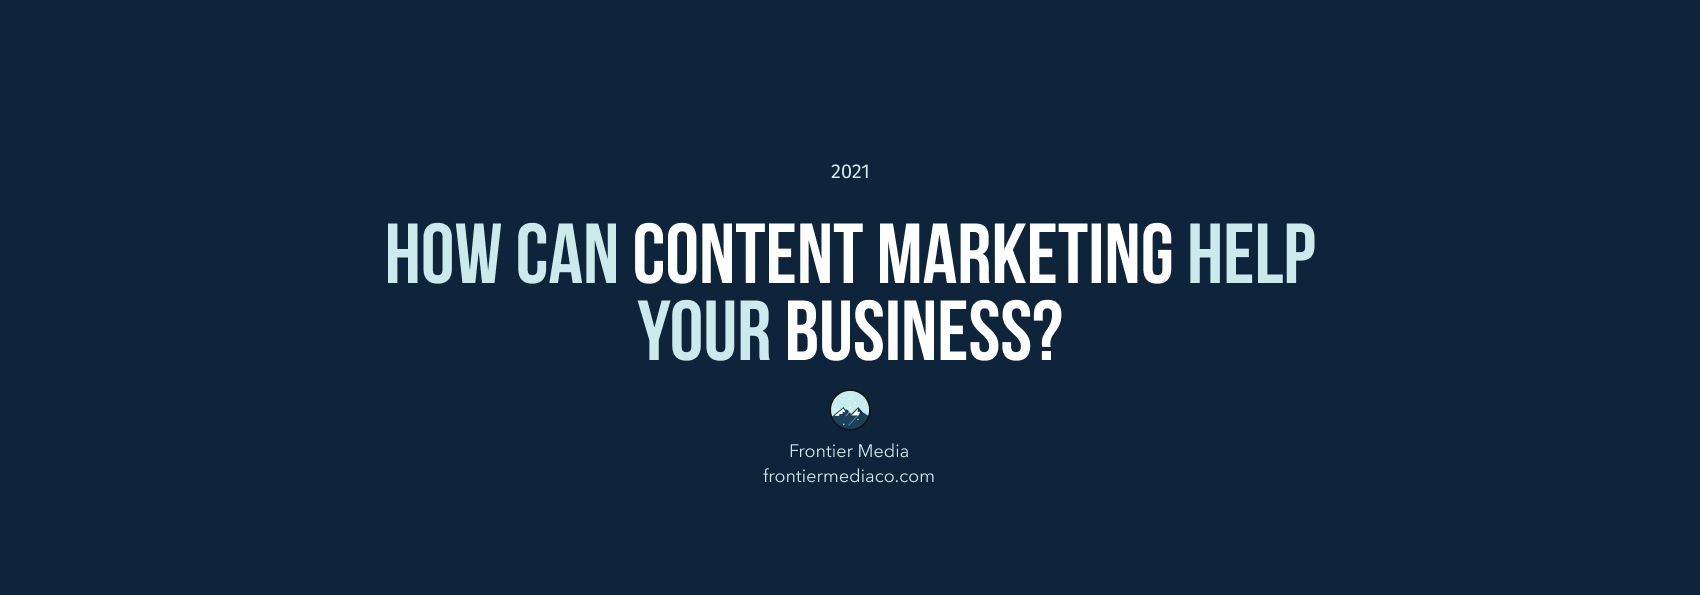 How Can Content Marketing Help Your Business?